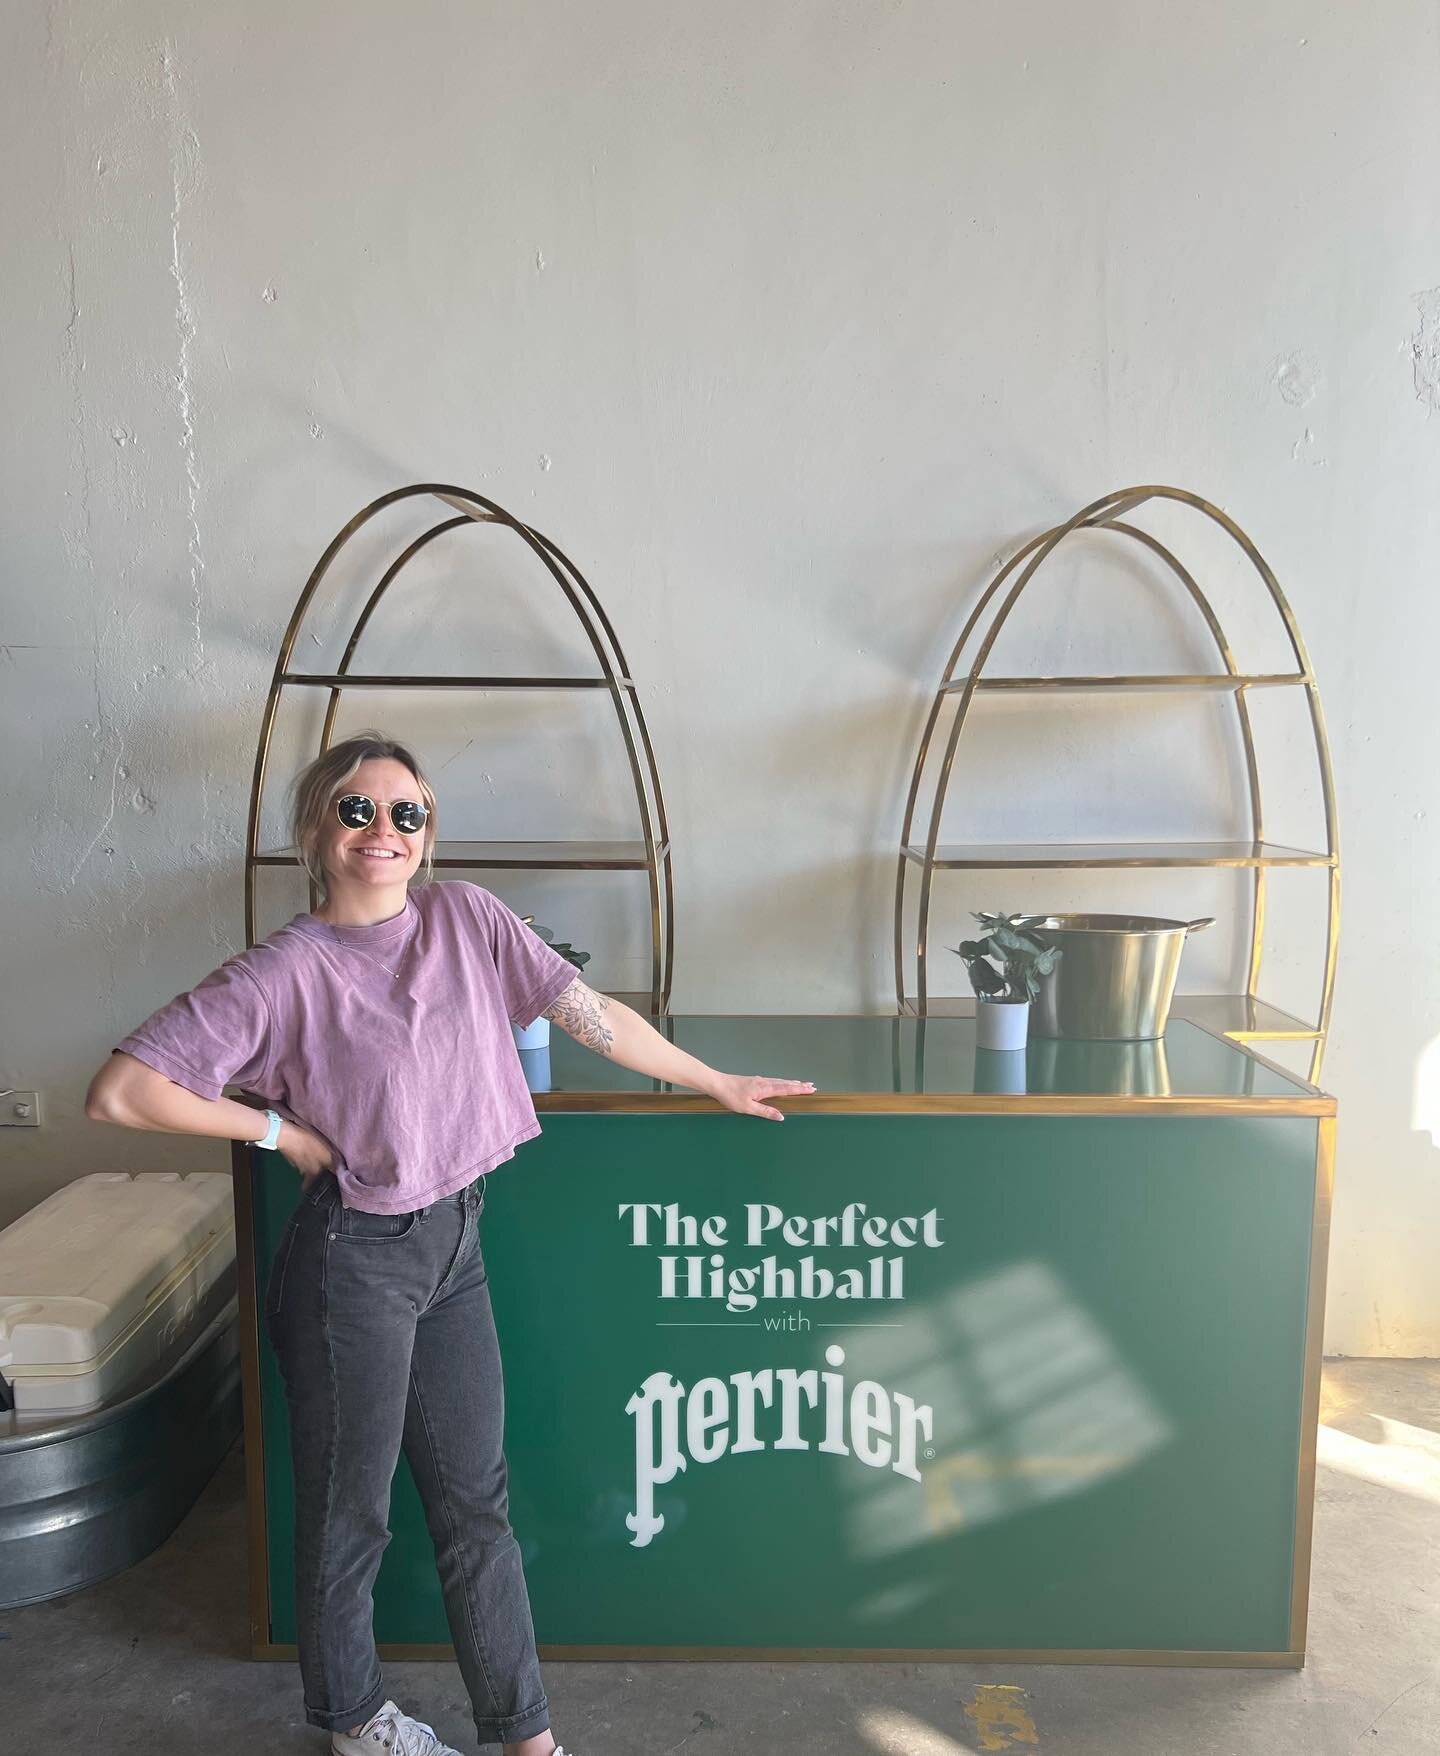 JANUARY &amp; FEBRUARY 2022 

Represented @perrier at Arizona Cocktail Weekend. Served as a Brand Rep rather than bartender and had a blast! ✅